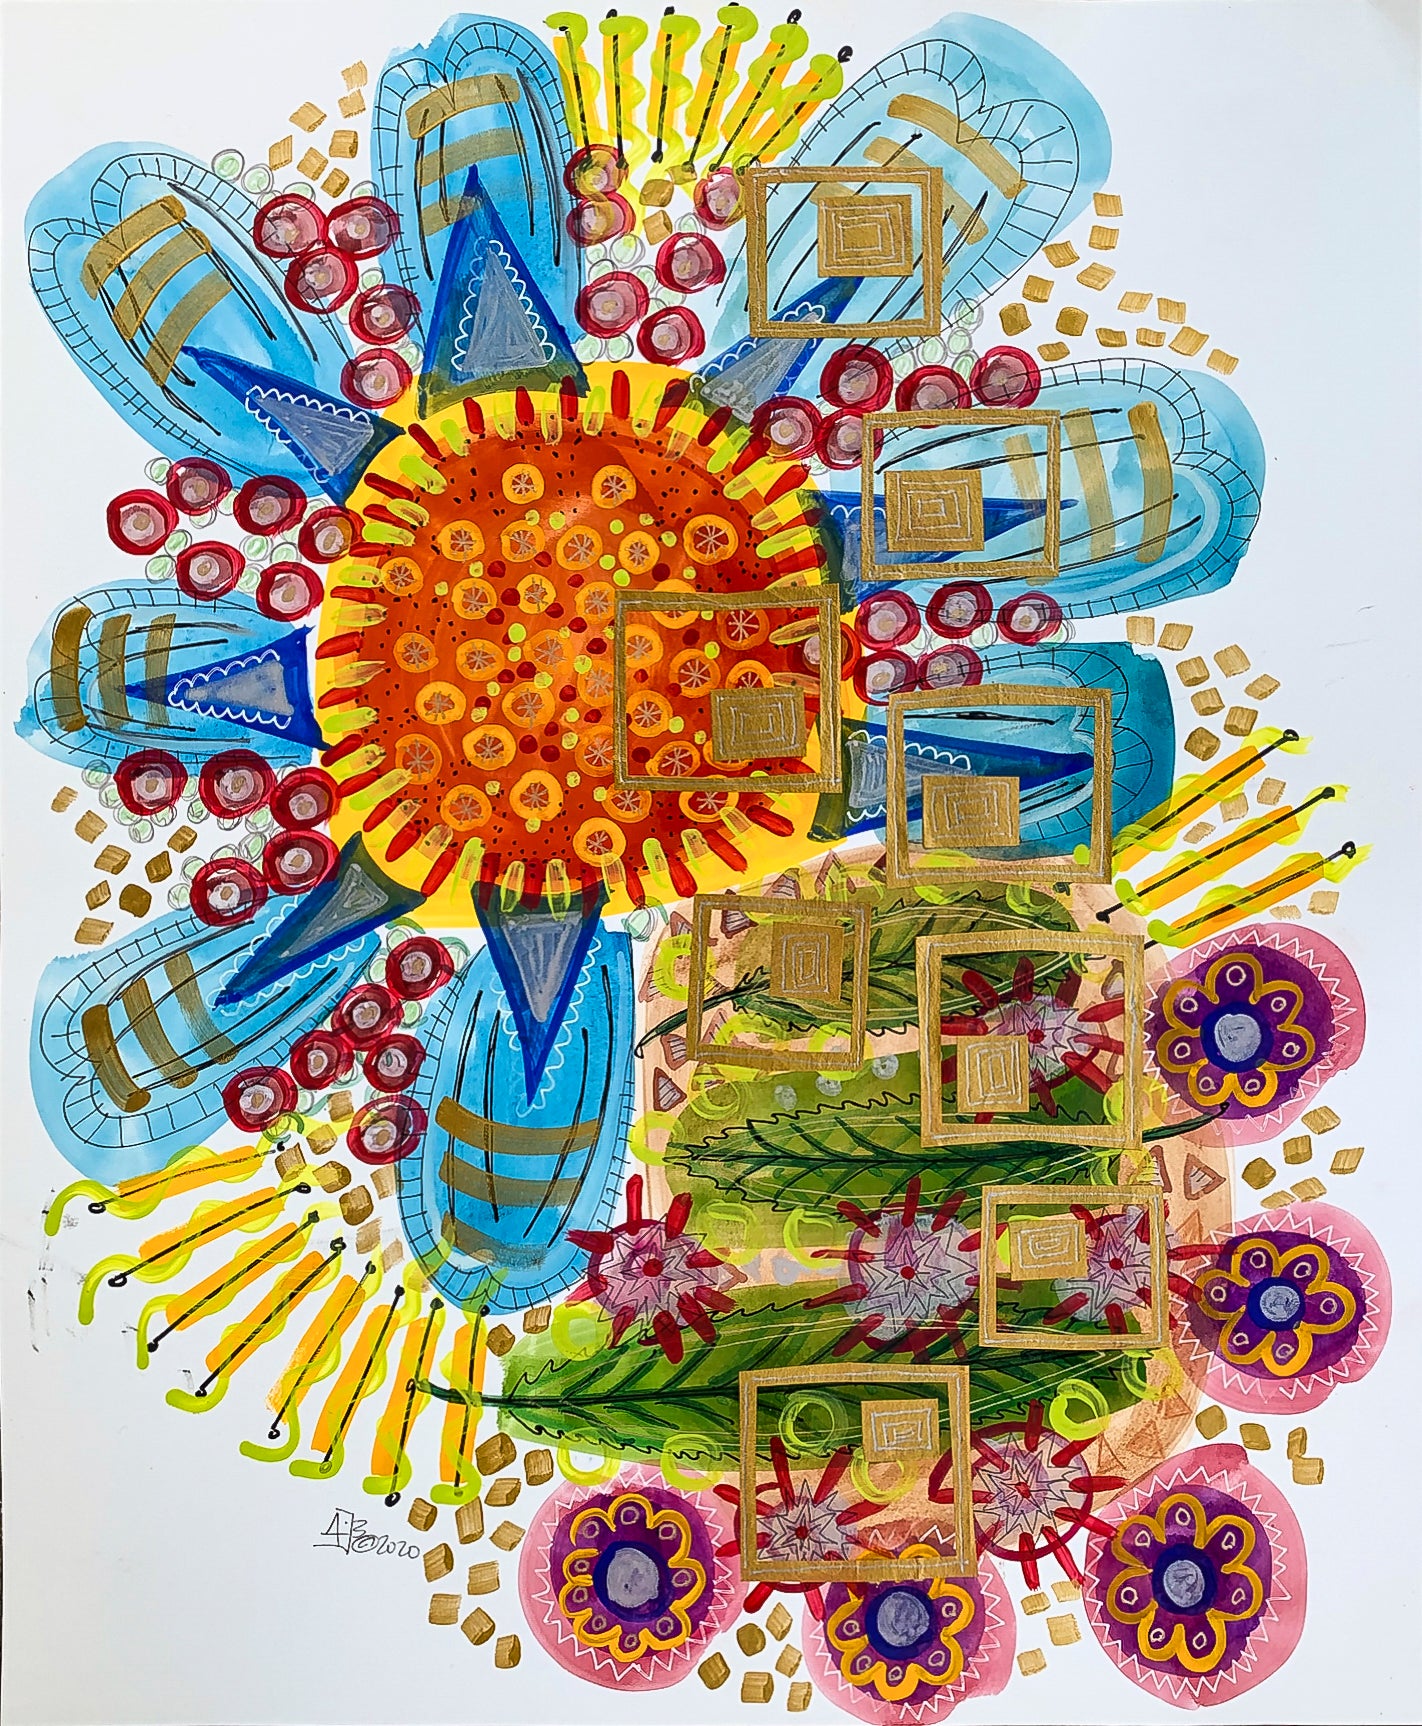 Abstract mixed media colorful image by Jenifer Hernandez - use of paint, markers, added bits of paper title 'Quarantine'